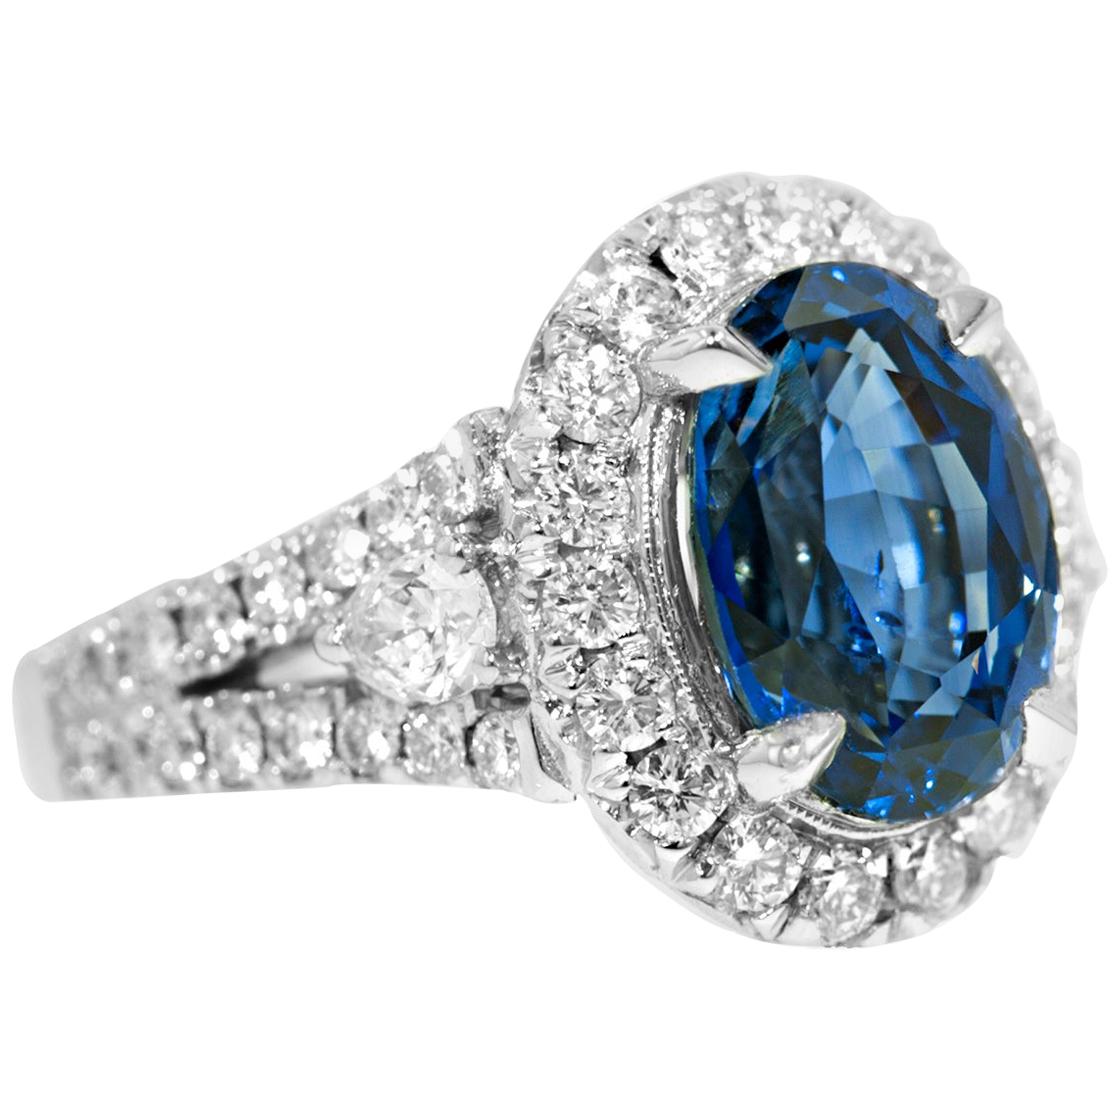 5.60 Carat Oval Blue Sapphire and Diamonds Fashion Ring in 18 Karat White Gold For Sale